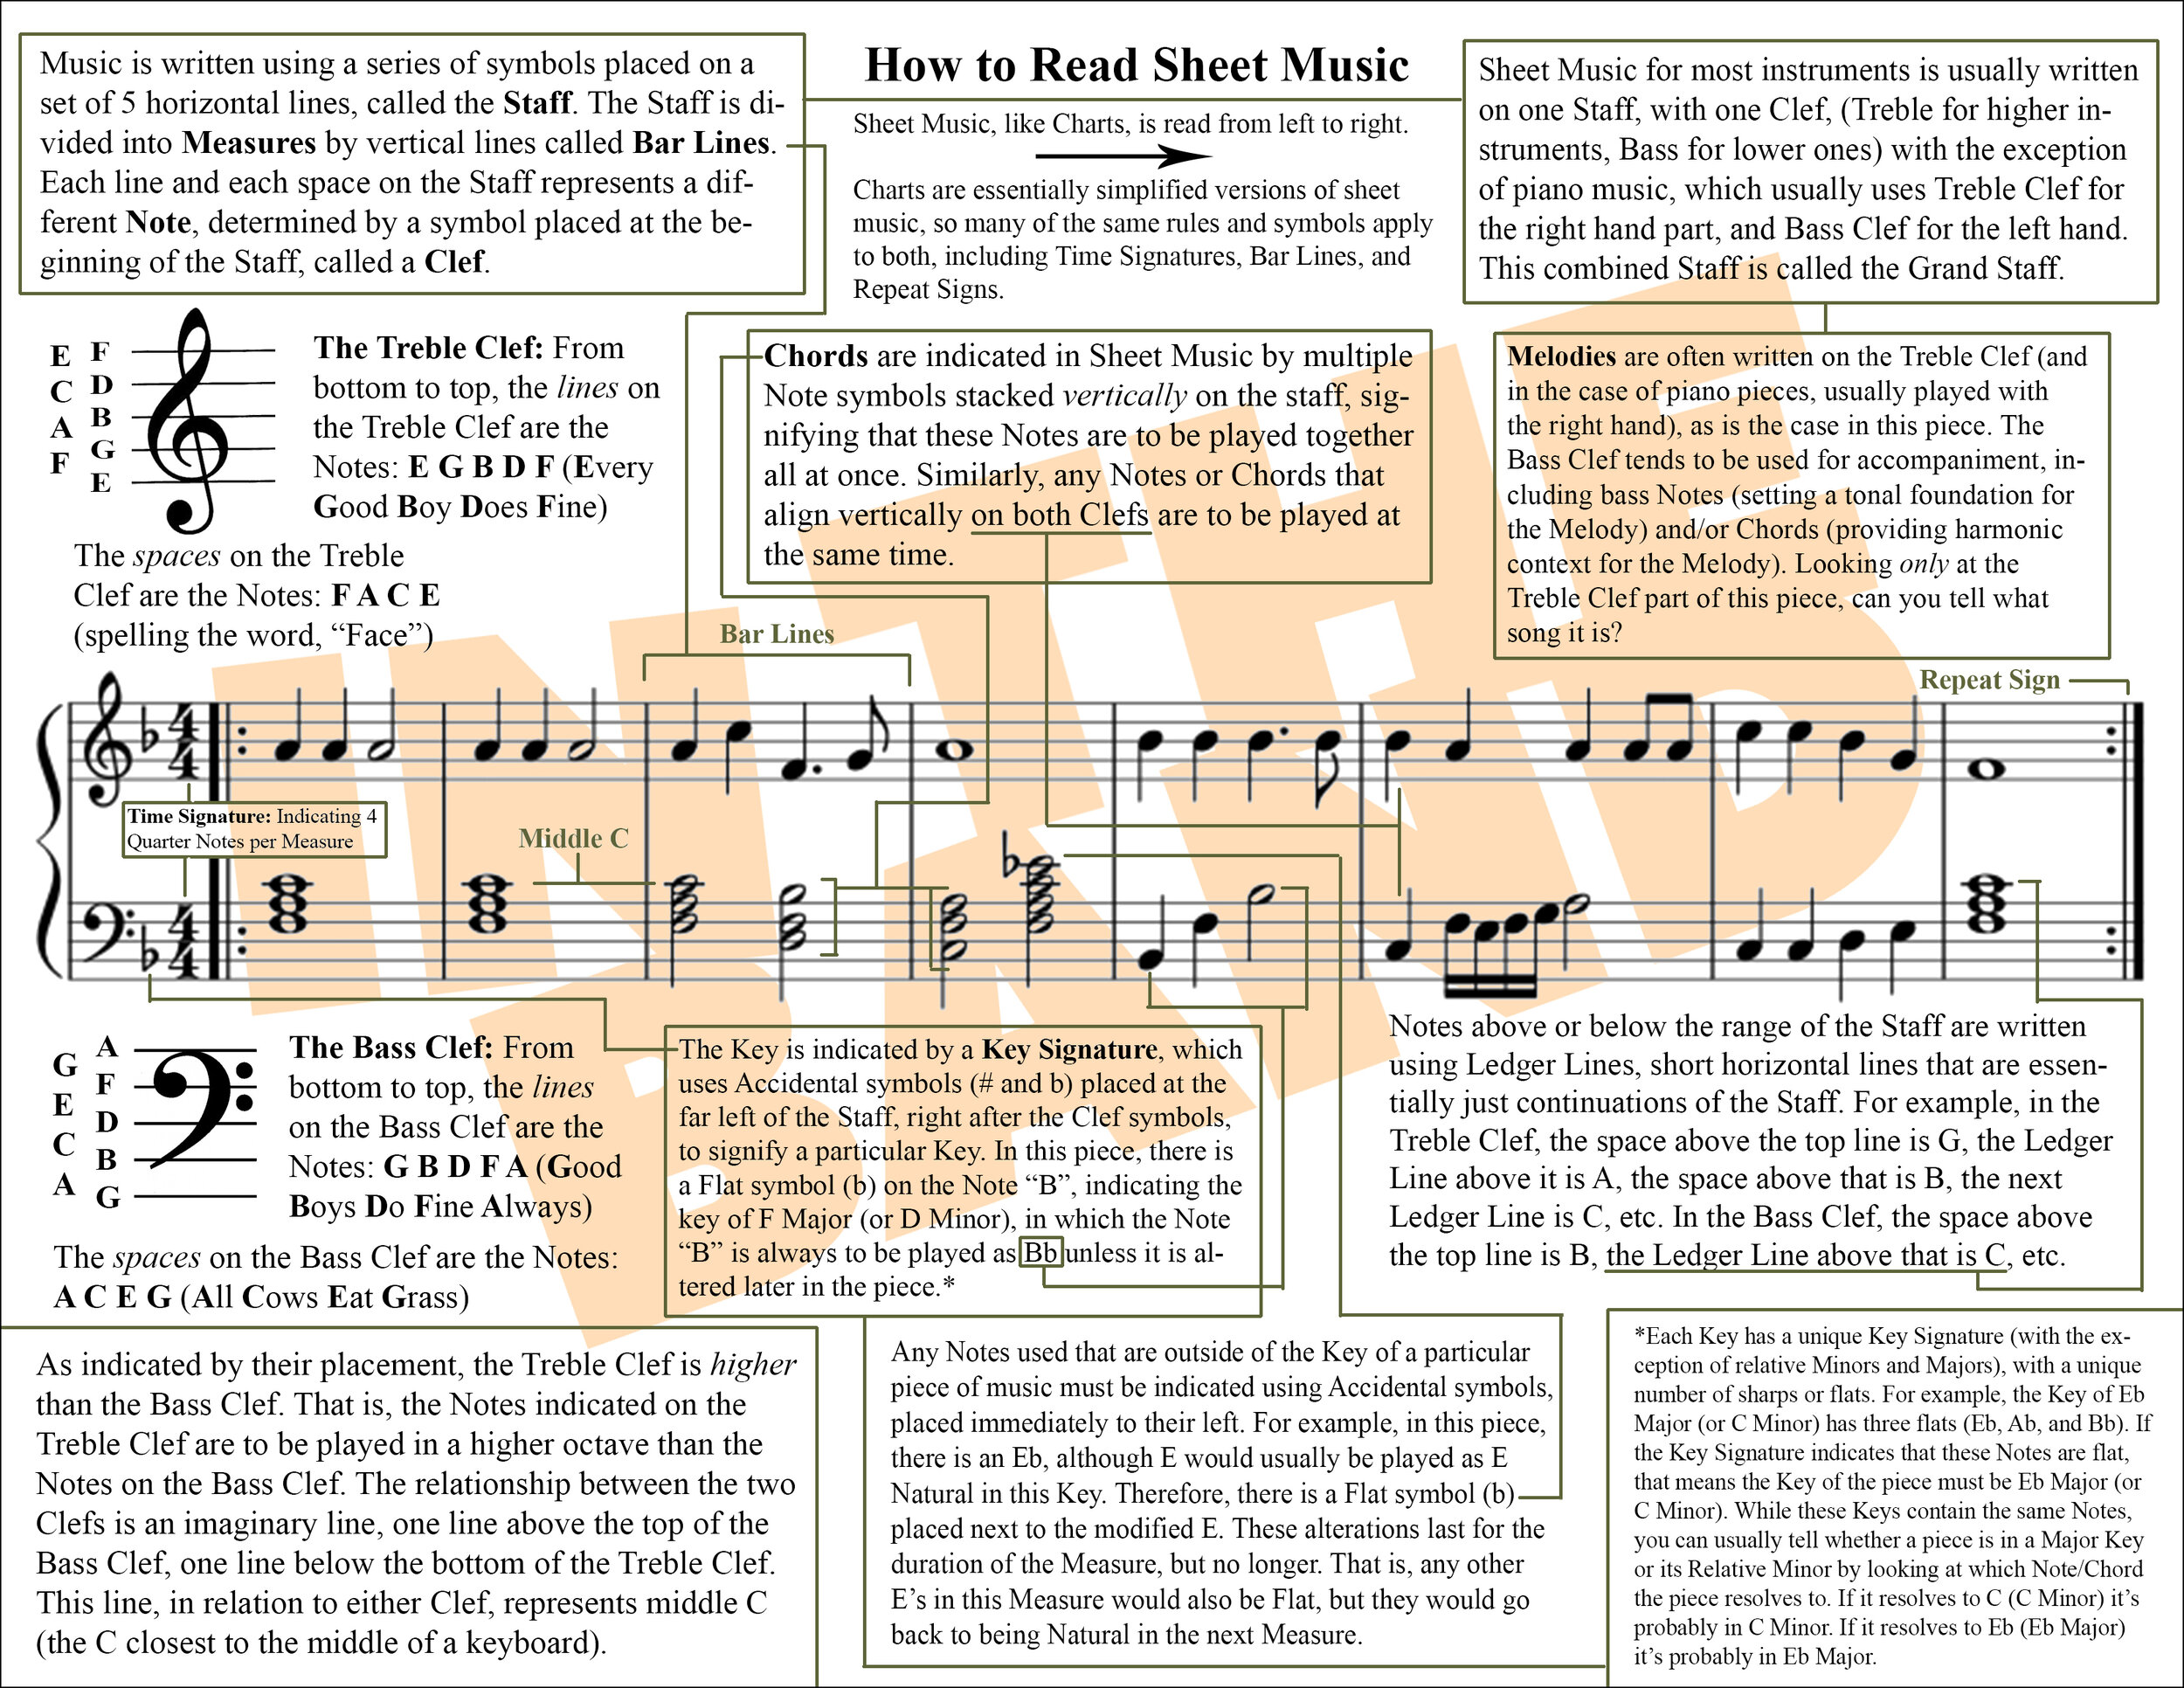 How to Read Sheet Music